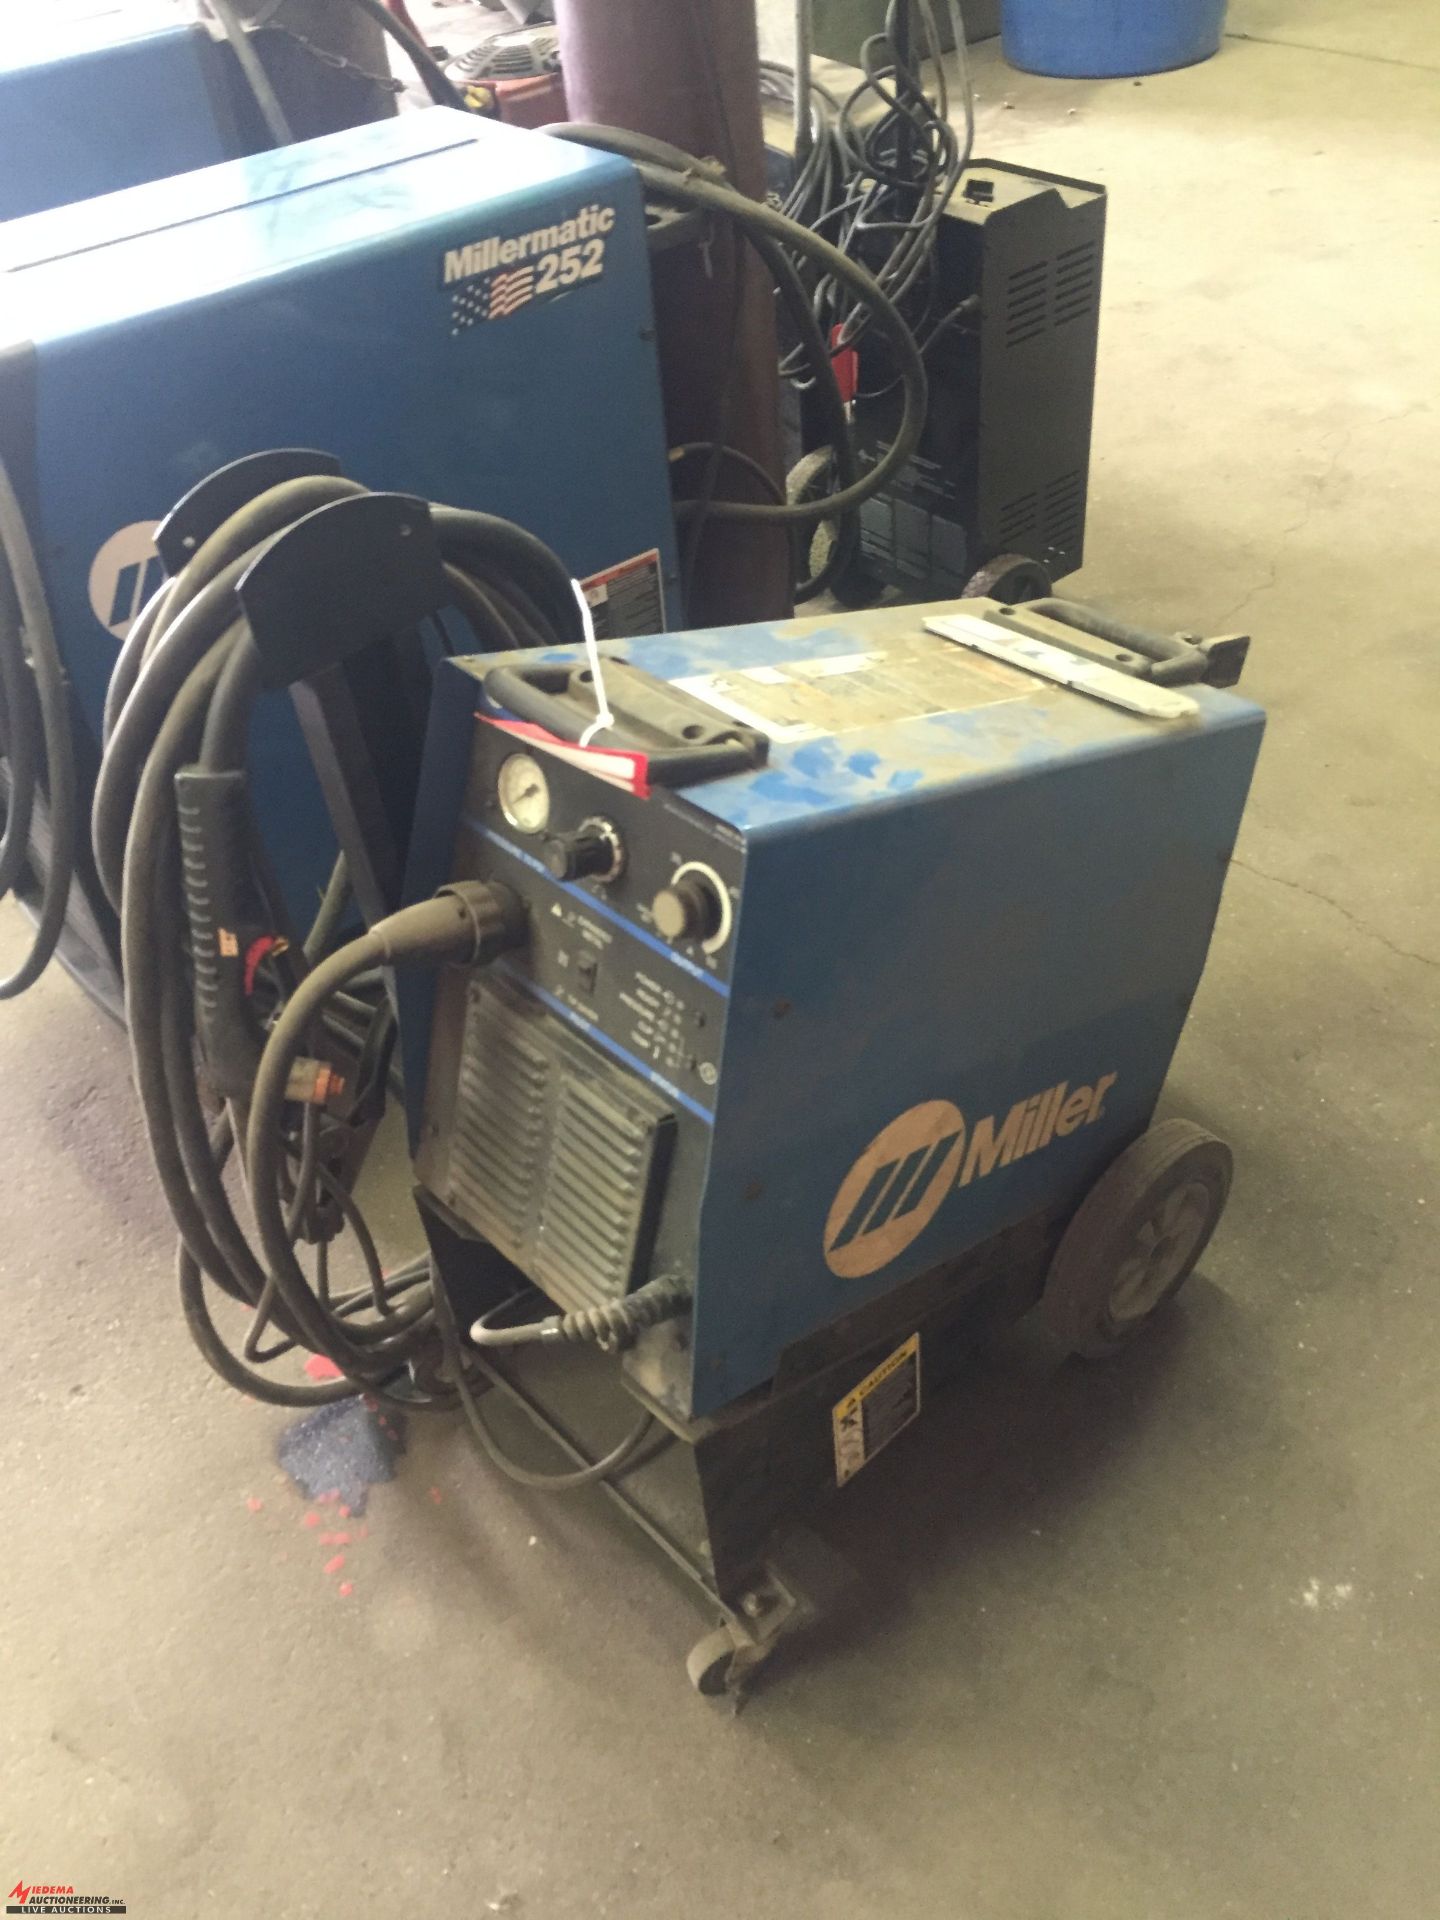 MILLER SPECTRUM 2050 PLASMA CUTTER WITH AUTO LINE, 3 PHASE [LOCATION: EAST WINANS STREET LOCATION]